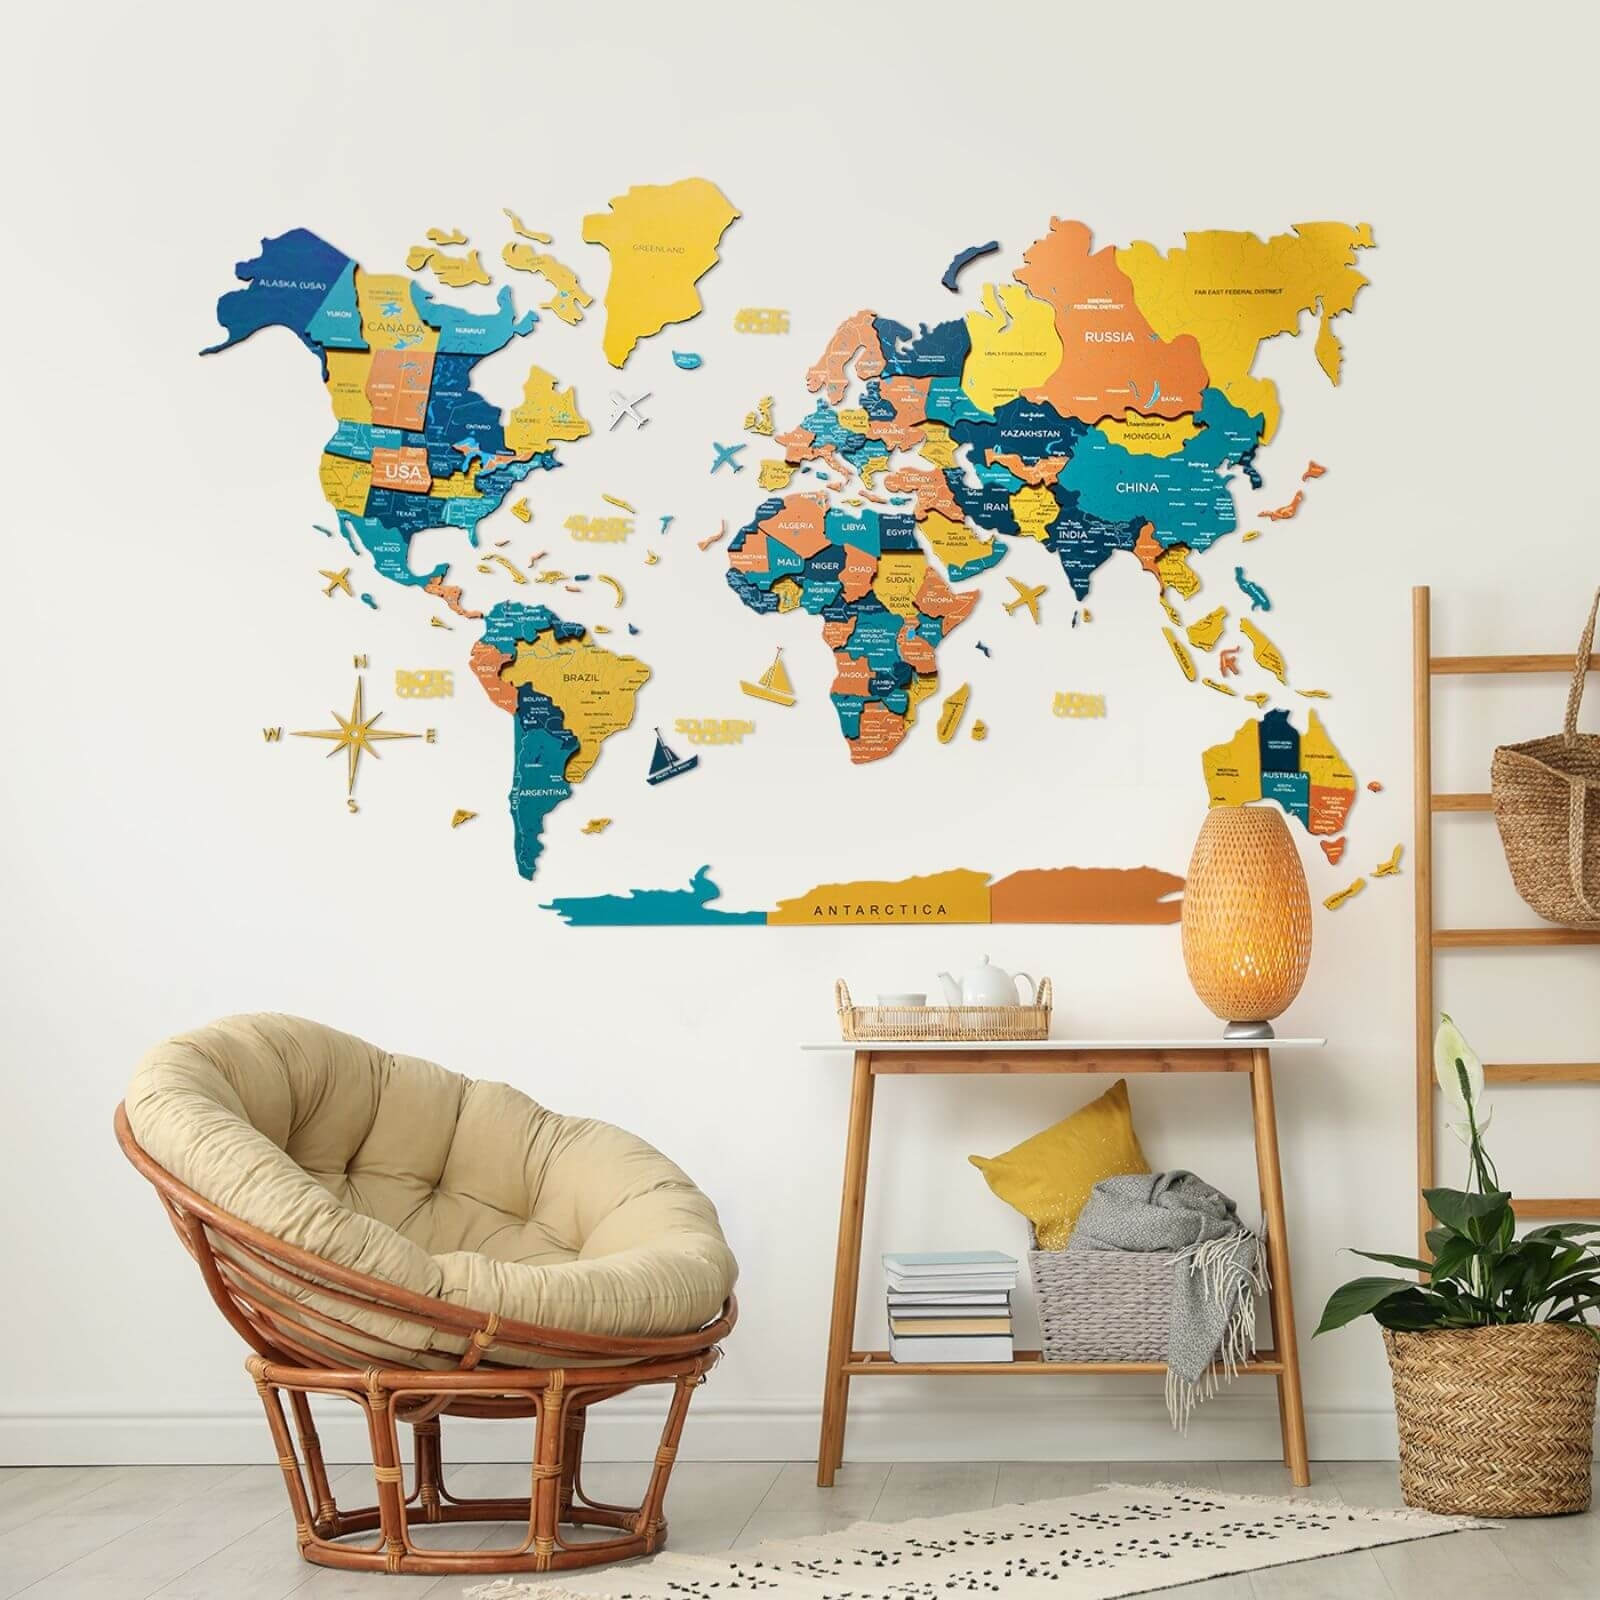 world map for kids to color